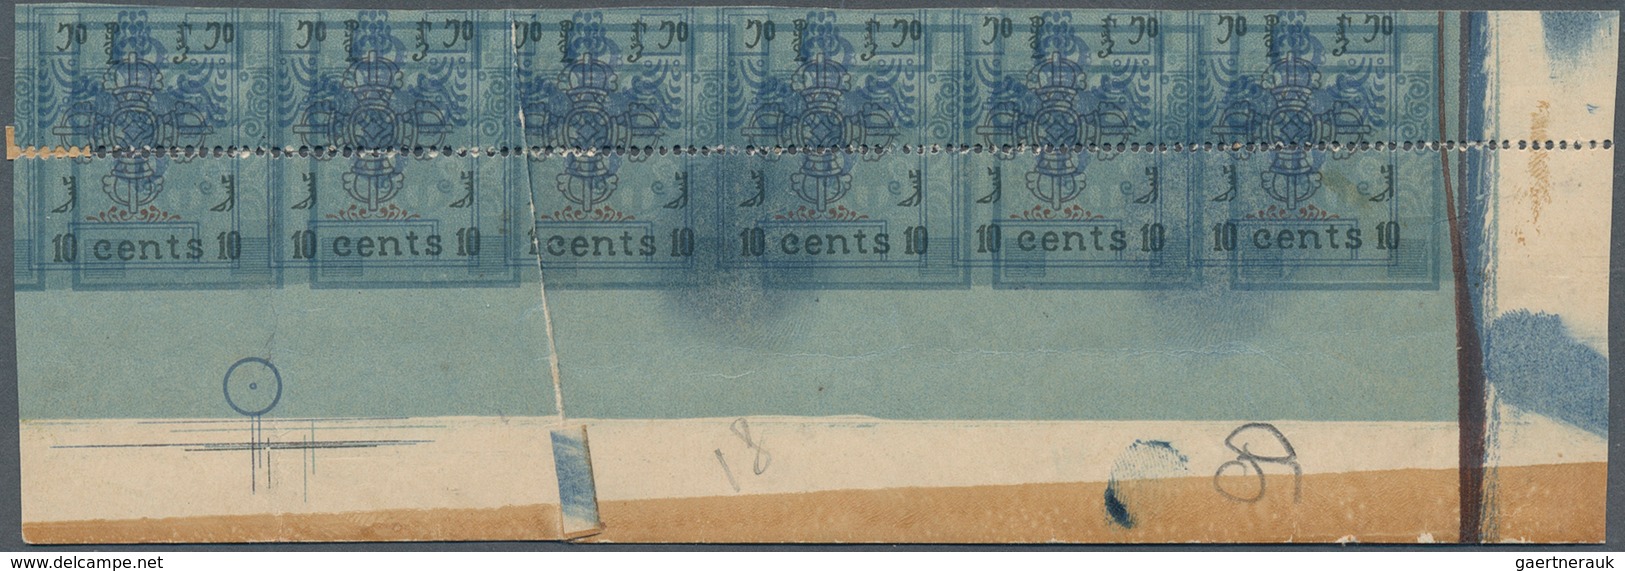 Mongolei: 1924 First Issue 10c. IMPERFORATED PROOF, Bottom Right Corner Strip Of 6, Variety "SHIFTED - Mongolei